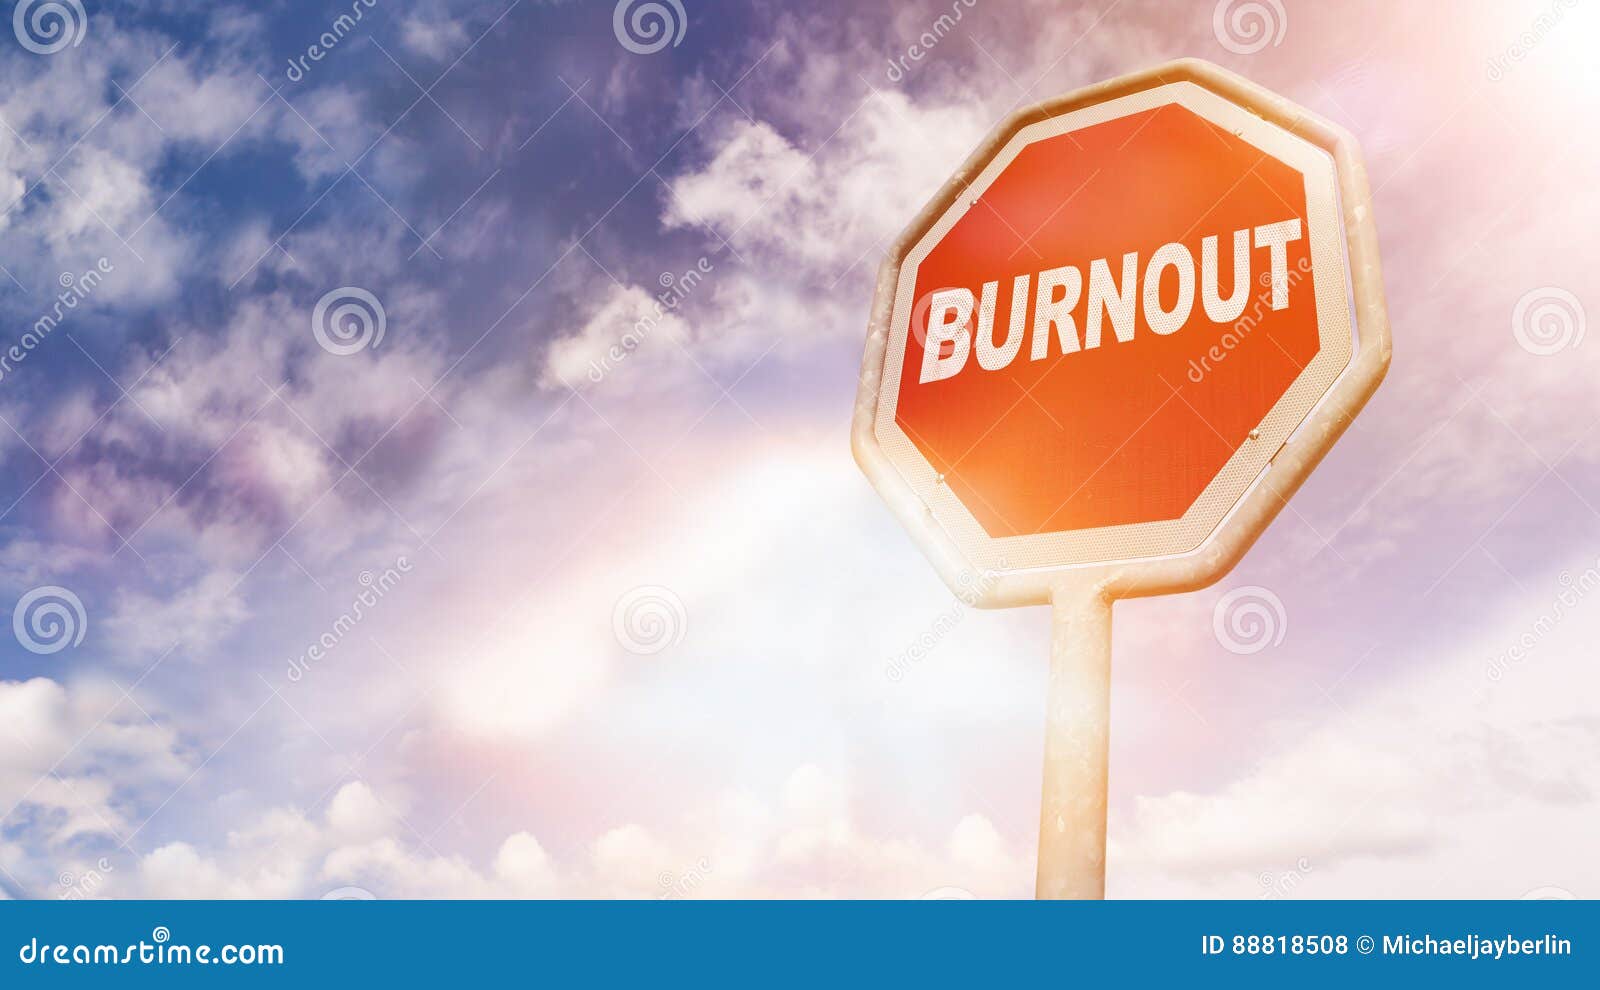 burnout, text on red traffic sign